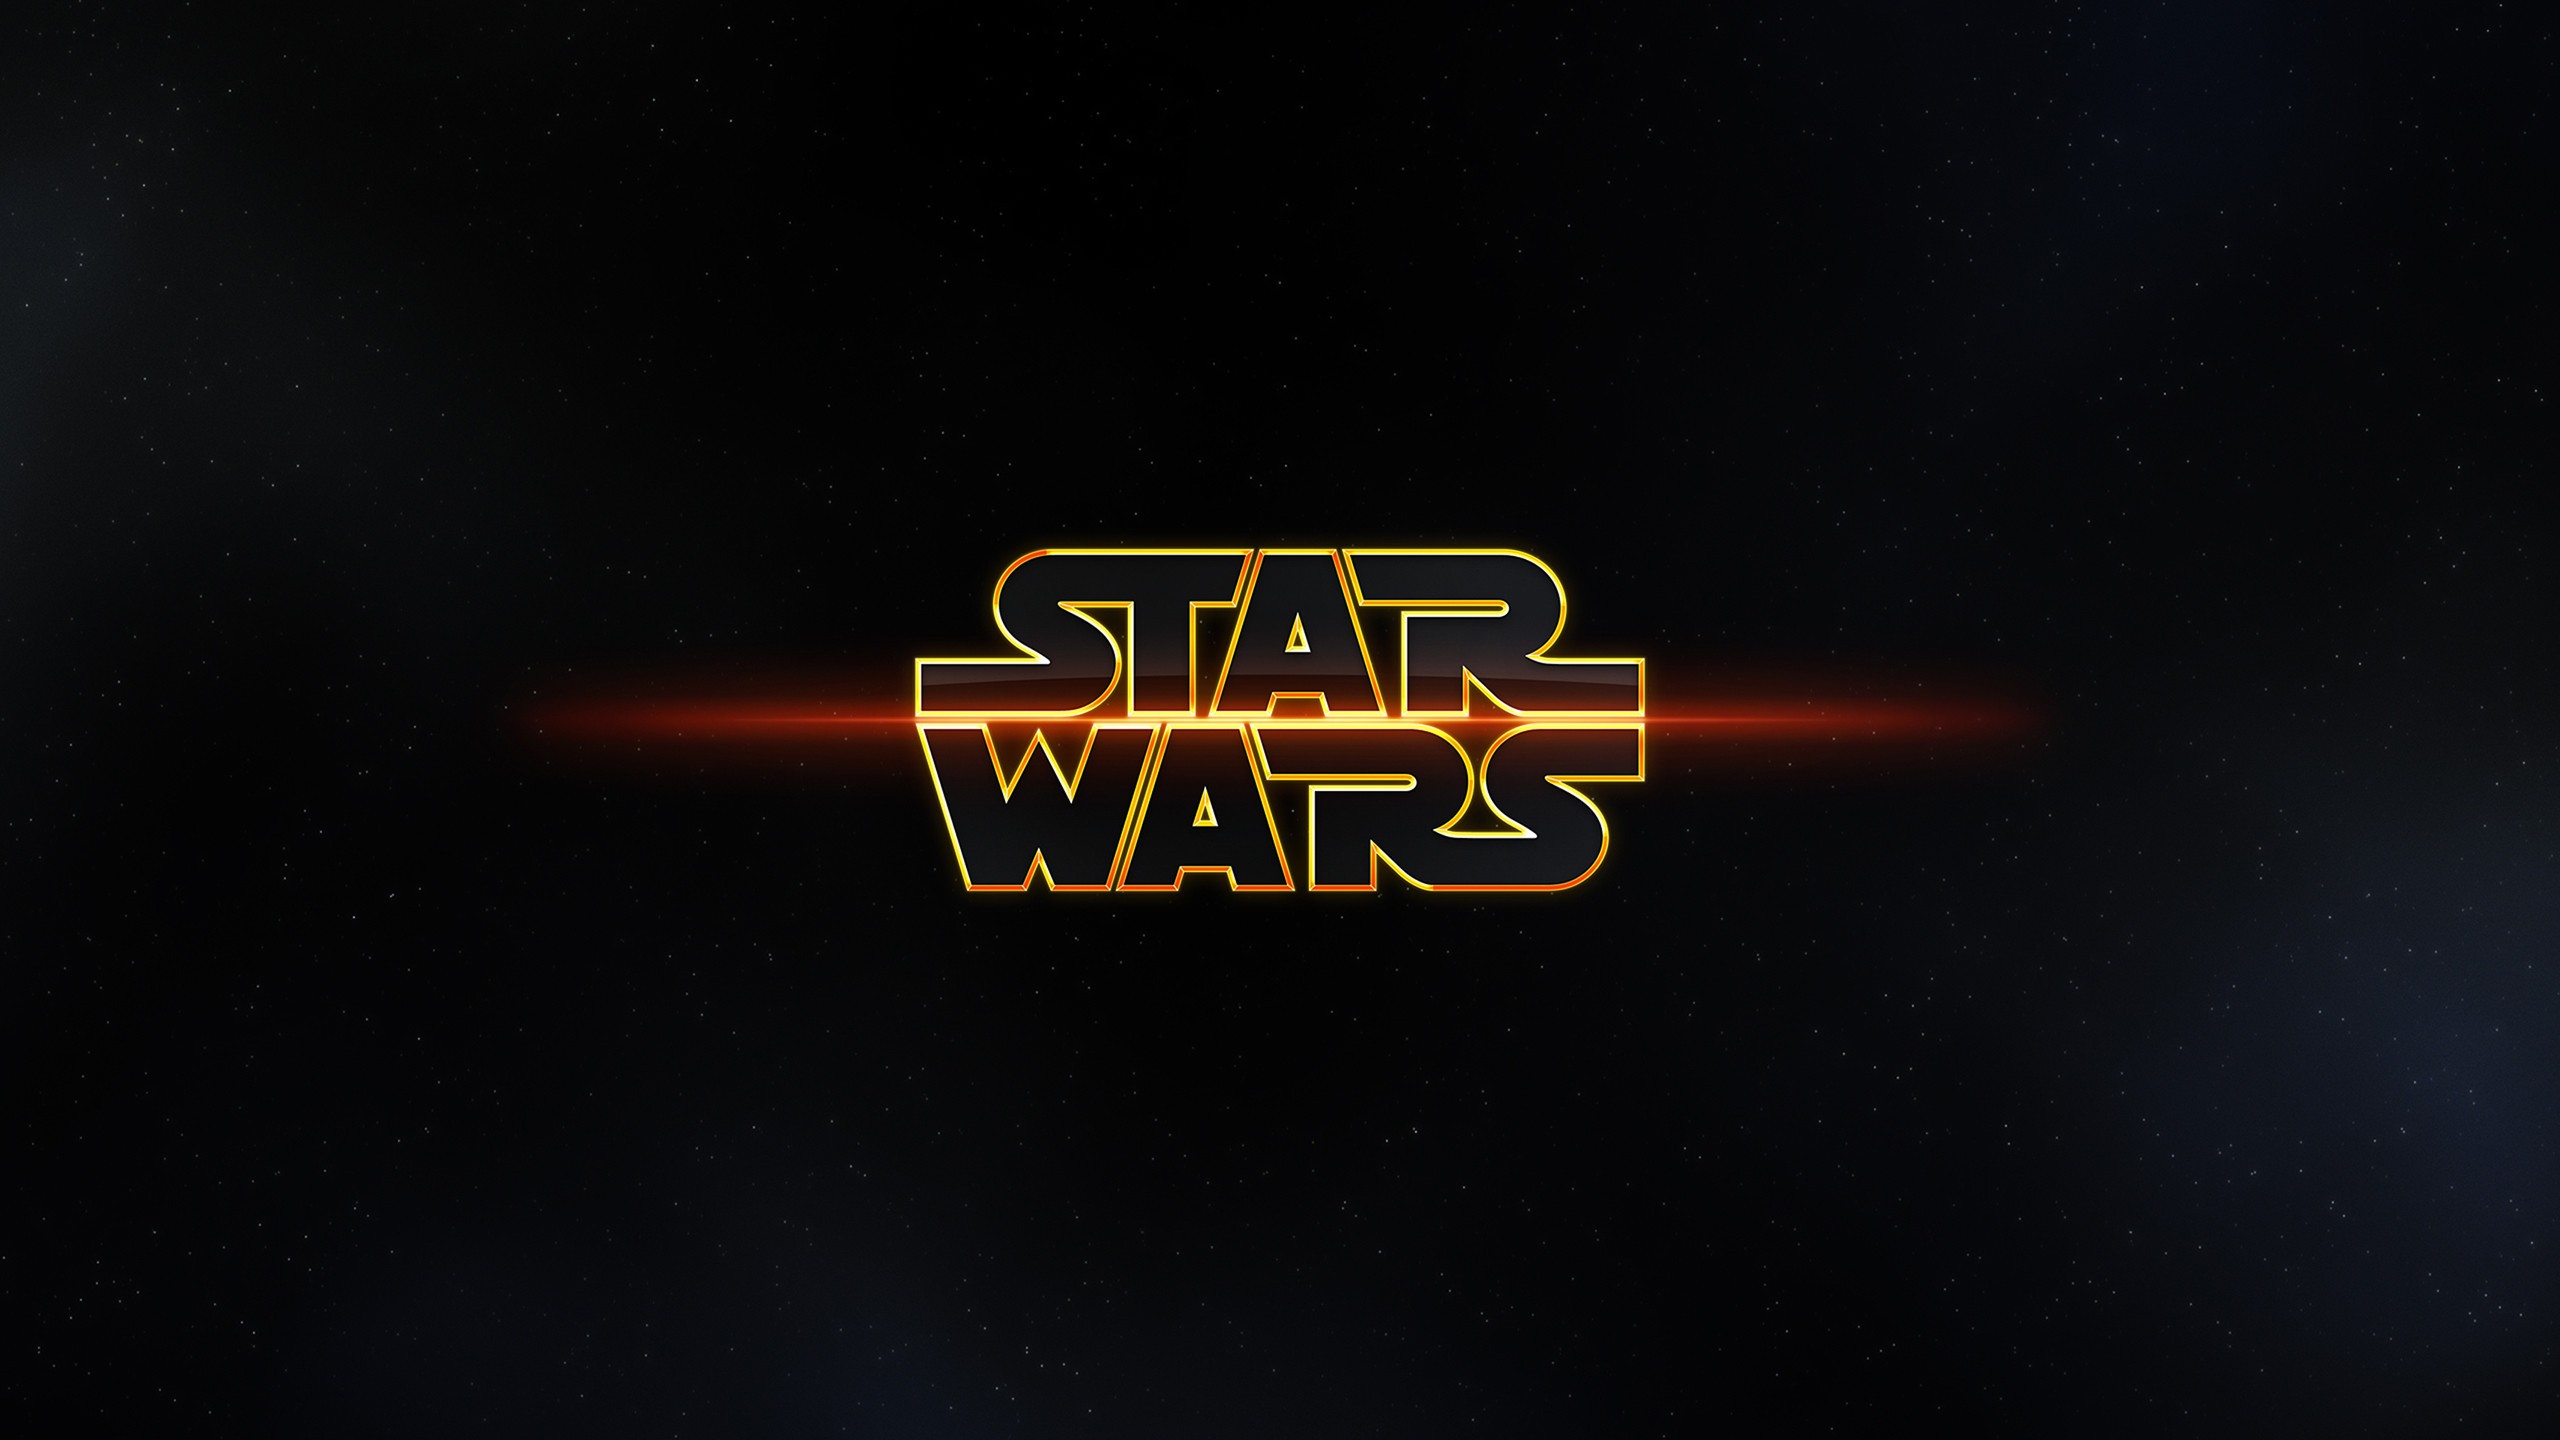 Star Wars, Logo, Movies, Science fiction, Typography Wallpaper